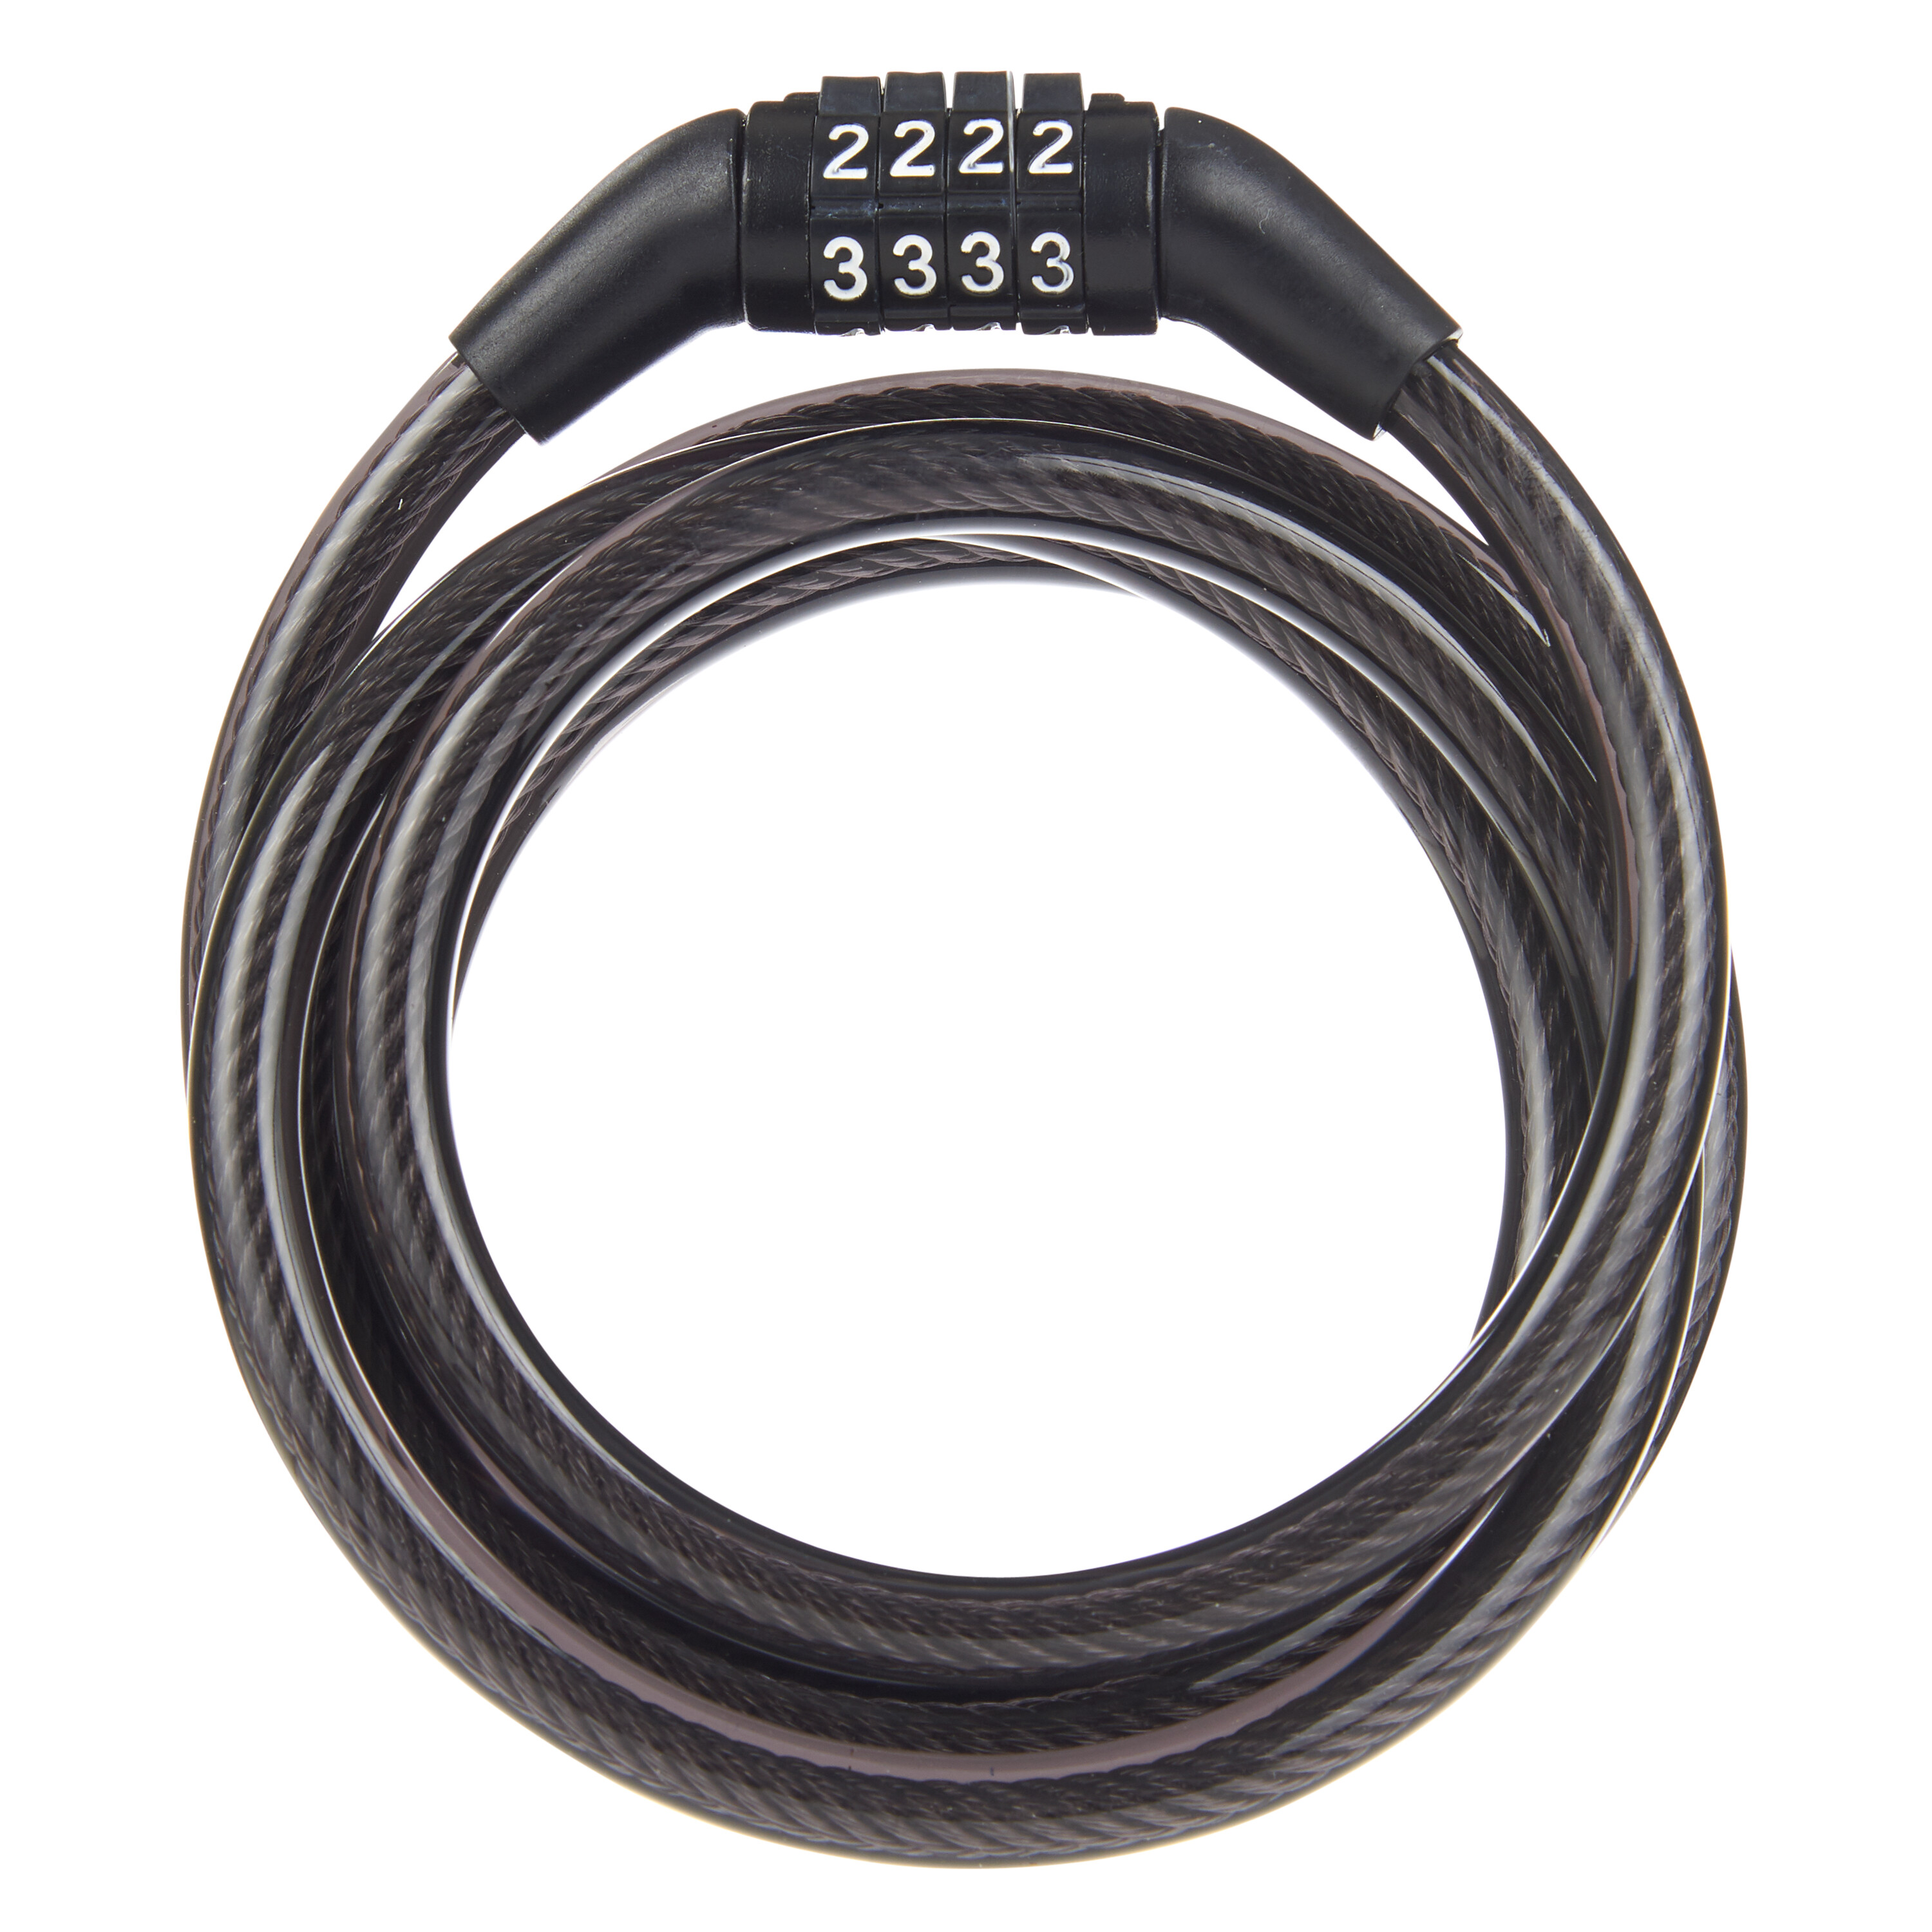 BRINKS - 7 ft x 5/8 Commercial Steel Braided Loop Cable - Heavy Duty Vinyl  Wrap for Corrosion Protection, Black